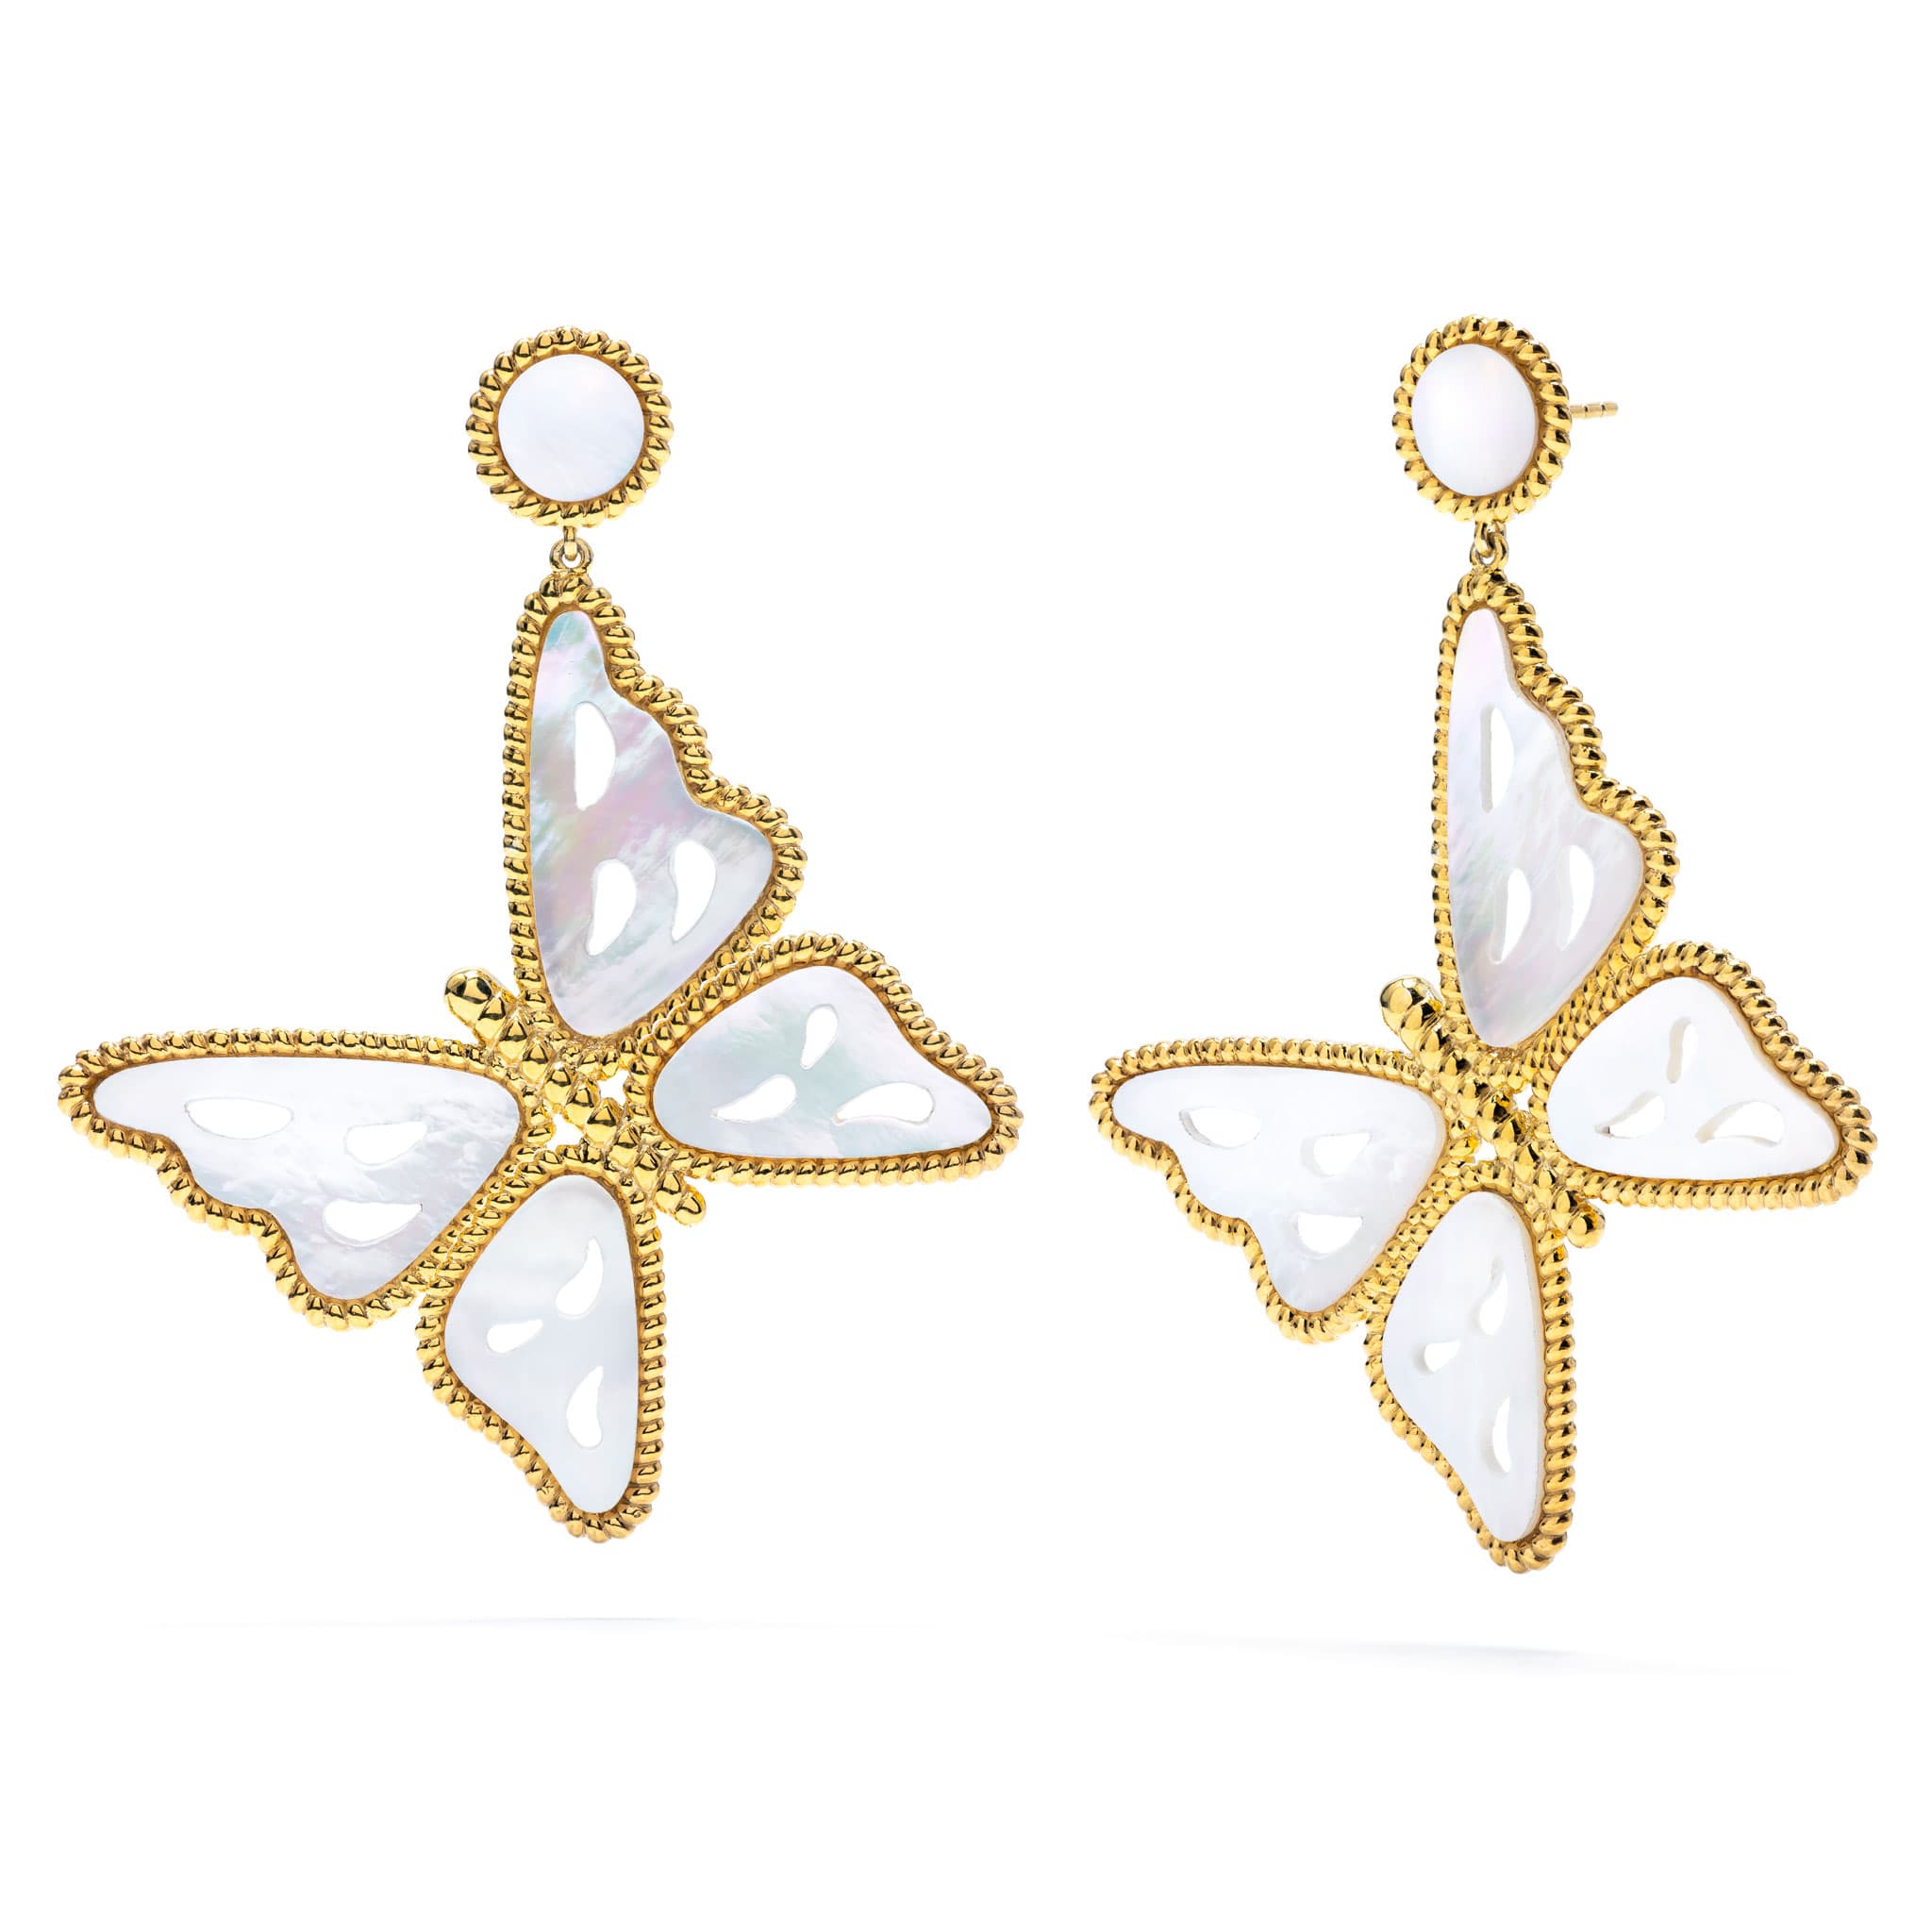 Earrings shaped like butterflies, made with gold and mother of pearl.